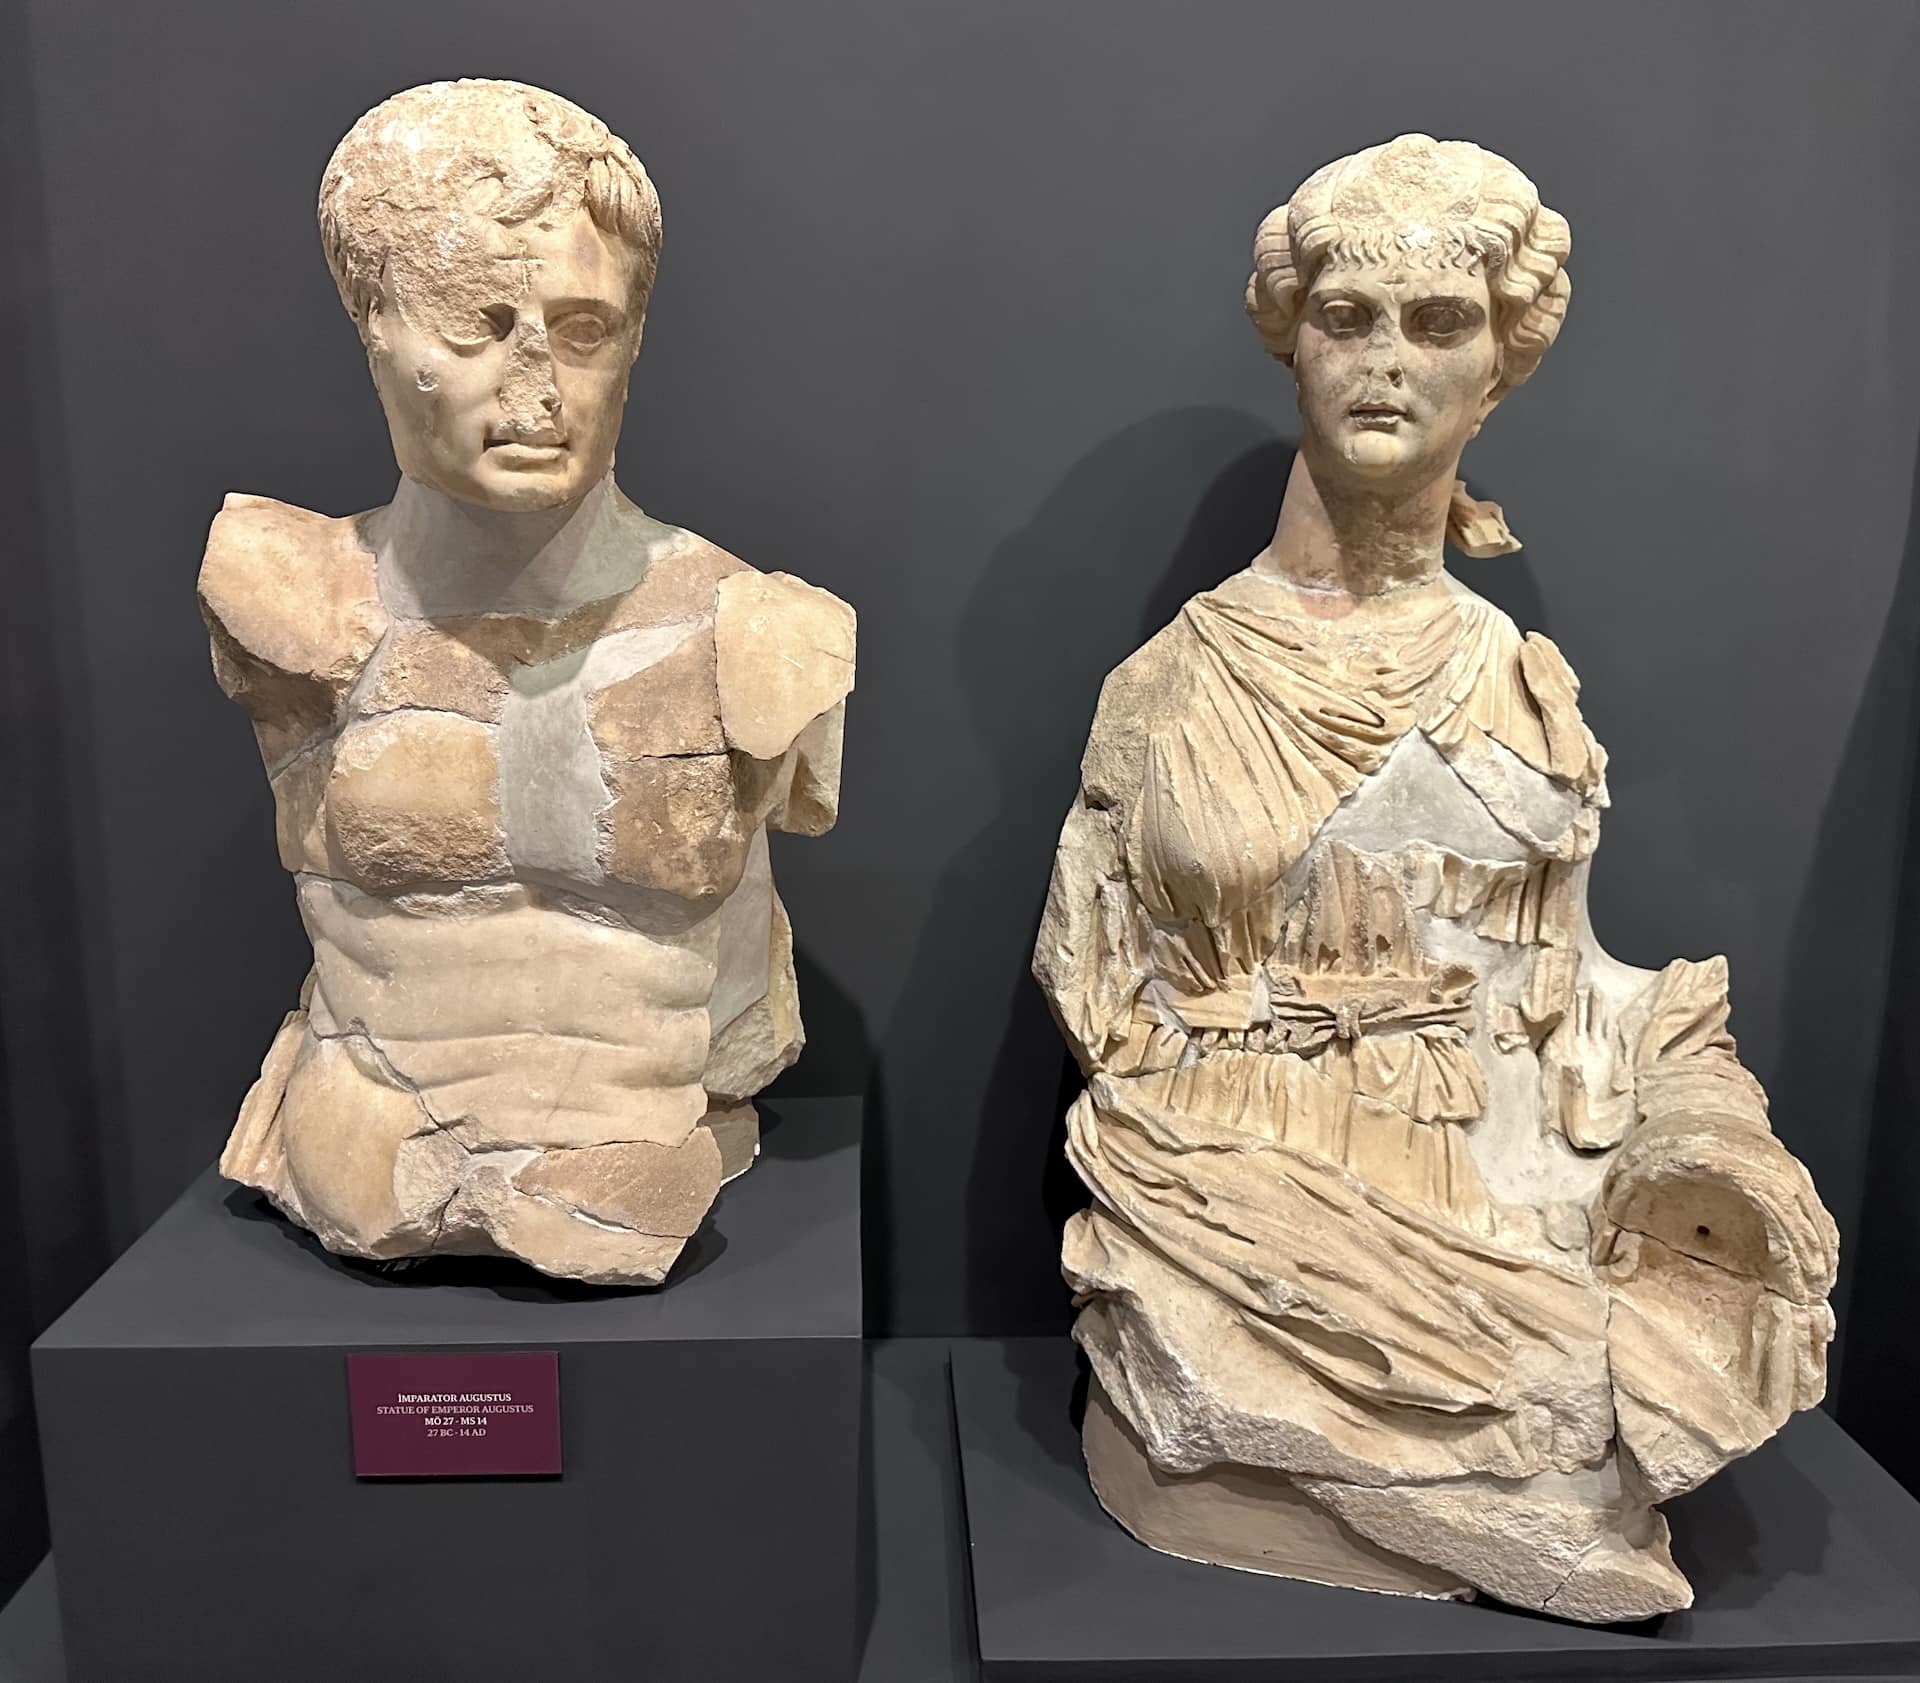 Statues of Emperor Augustus (left) and Empress Livia (right) (1st century) at the Ephesus Museum in Selçuk, Turkey